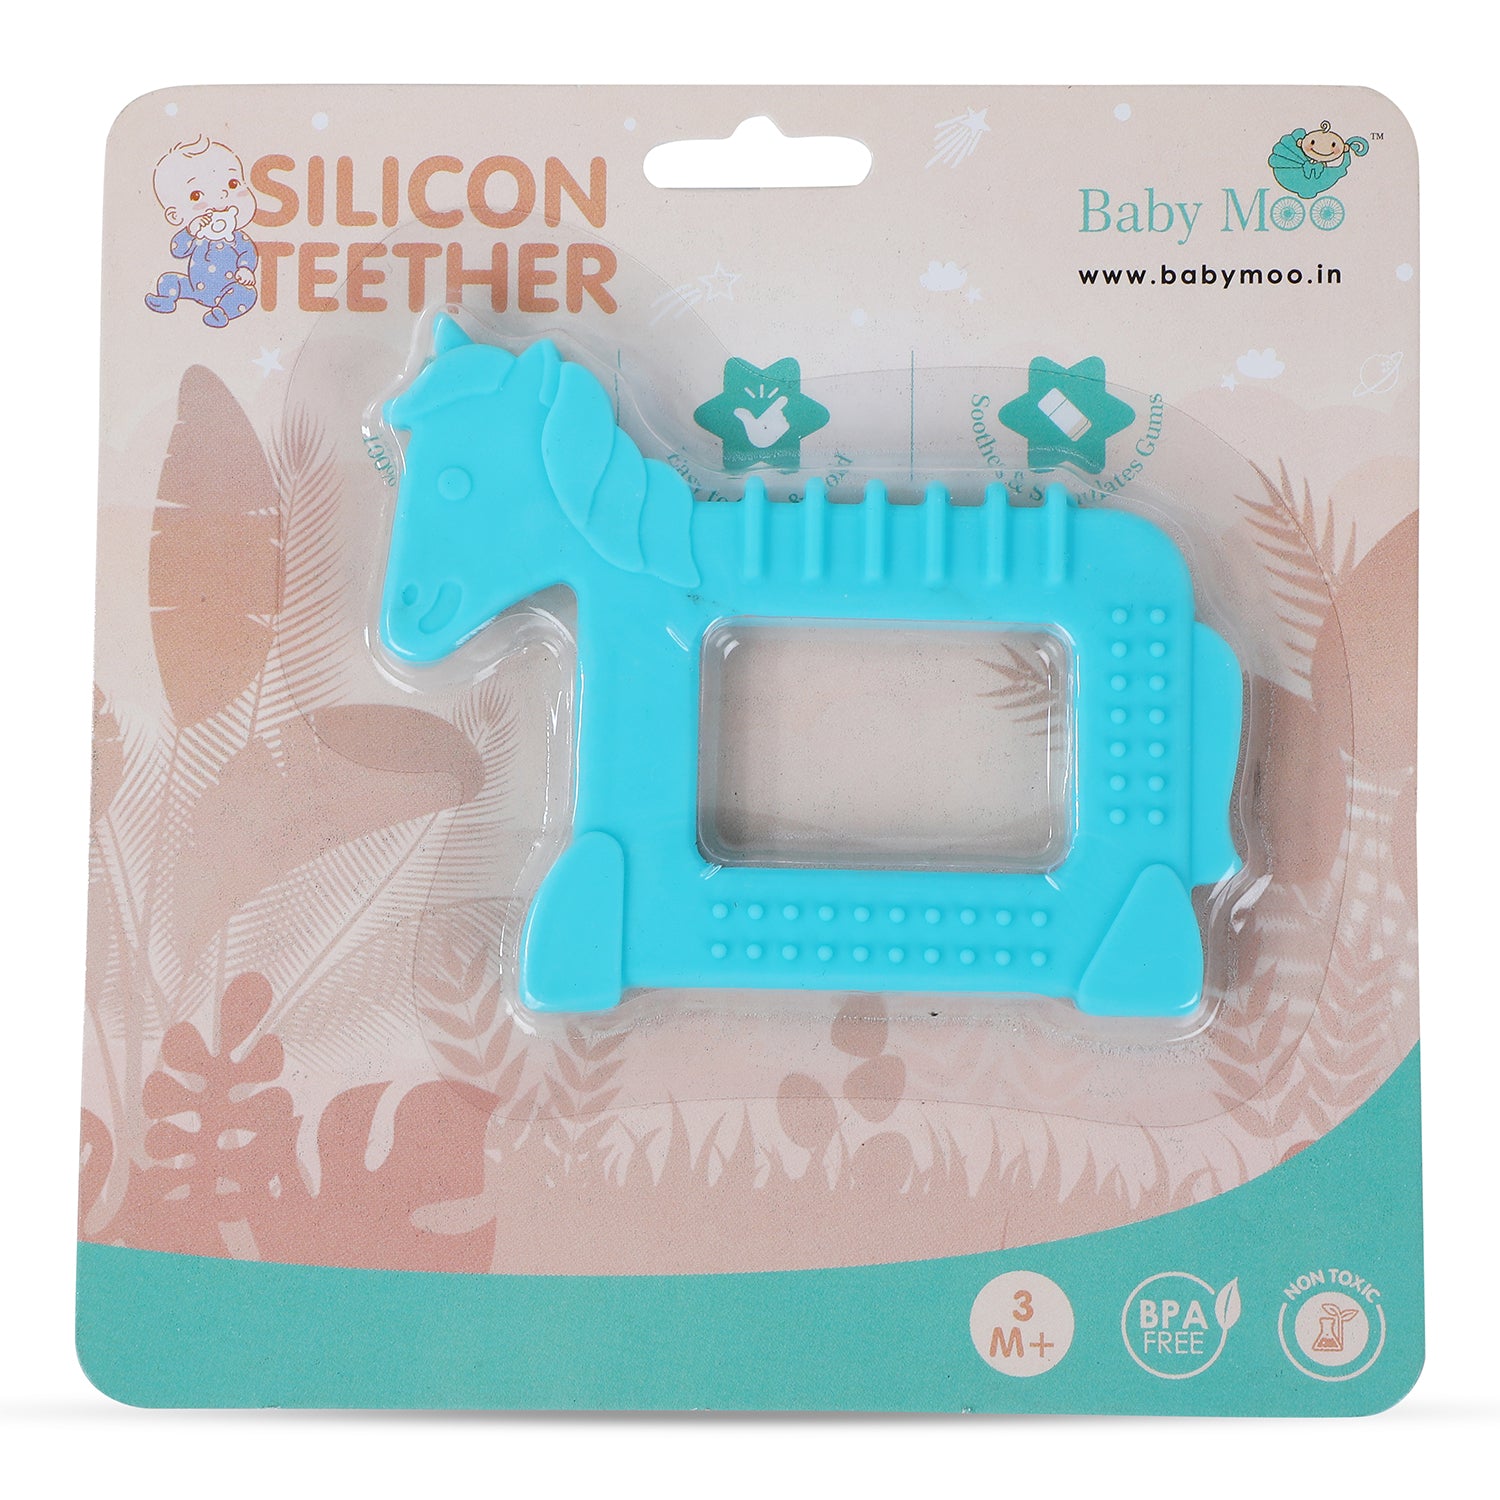 Baby Moo Unicorn Soothing Silicon Teether BPA And Toxin Free - Blue - Baby Moo